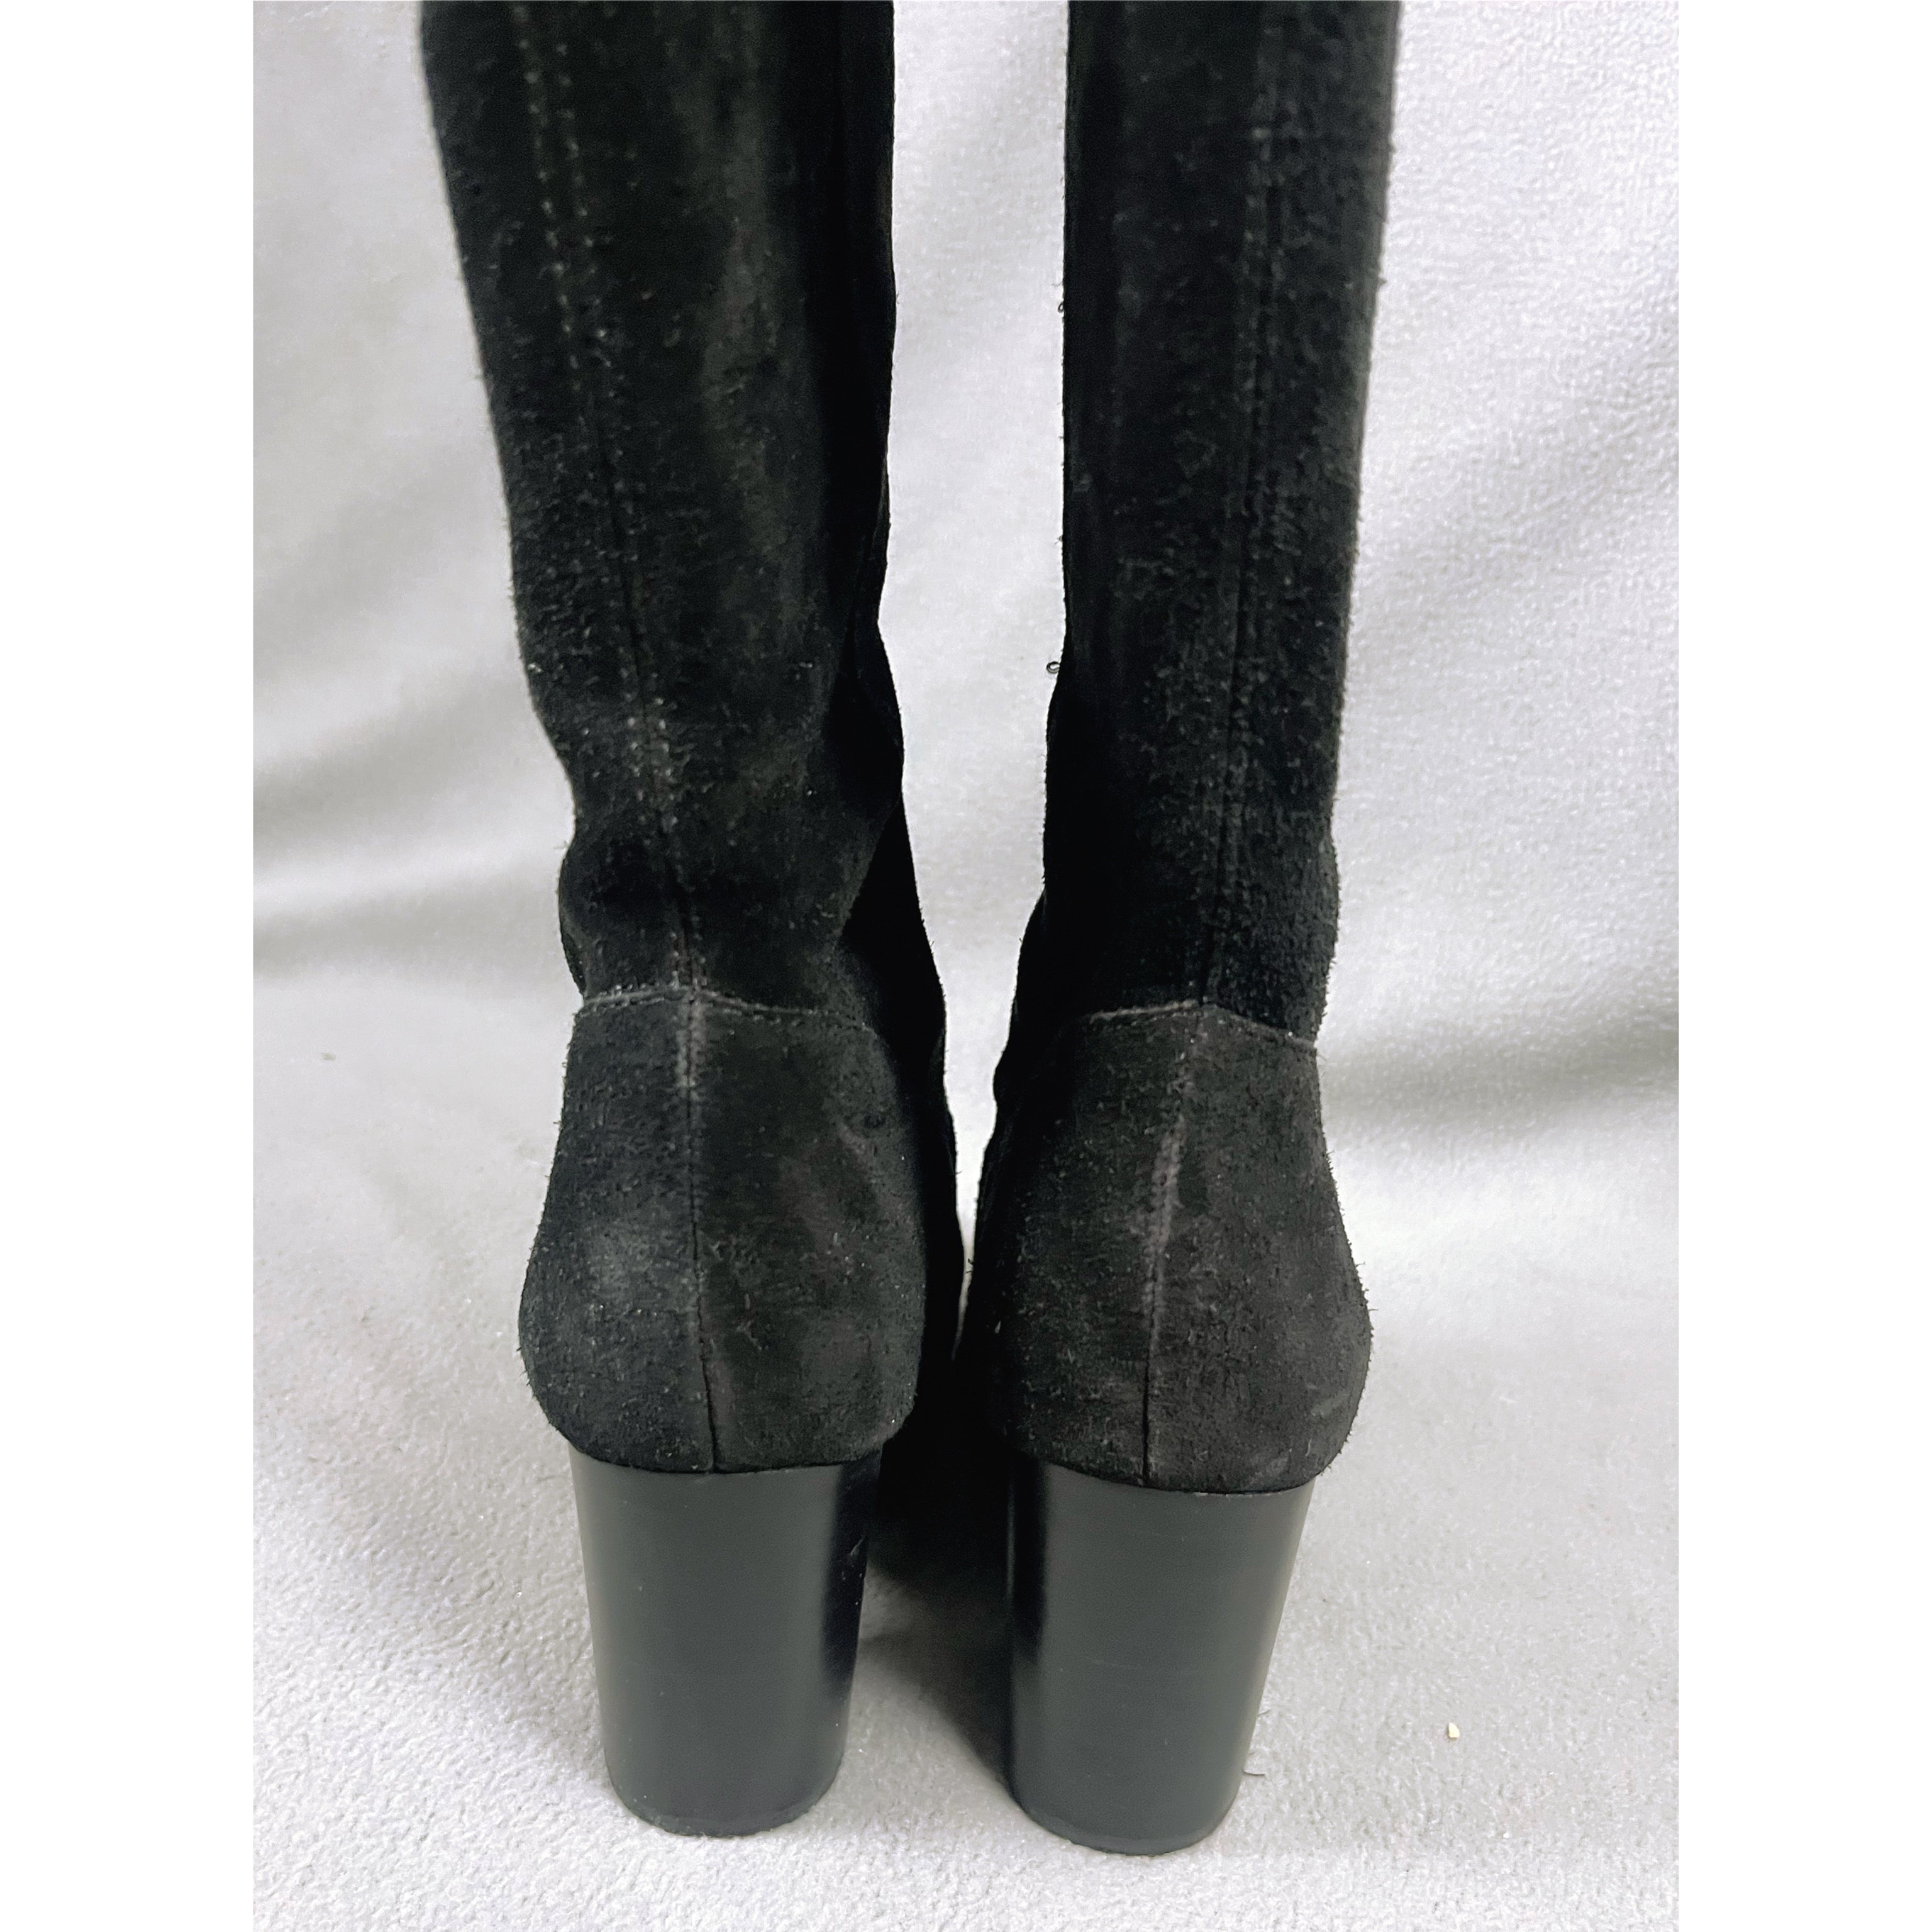 Jessica Simpson black suede over-the-knee boots, size 6.5, BRAND NEW!